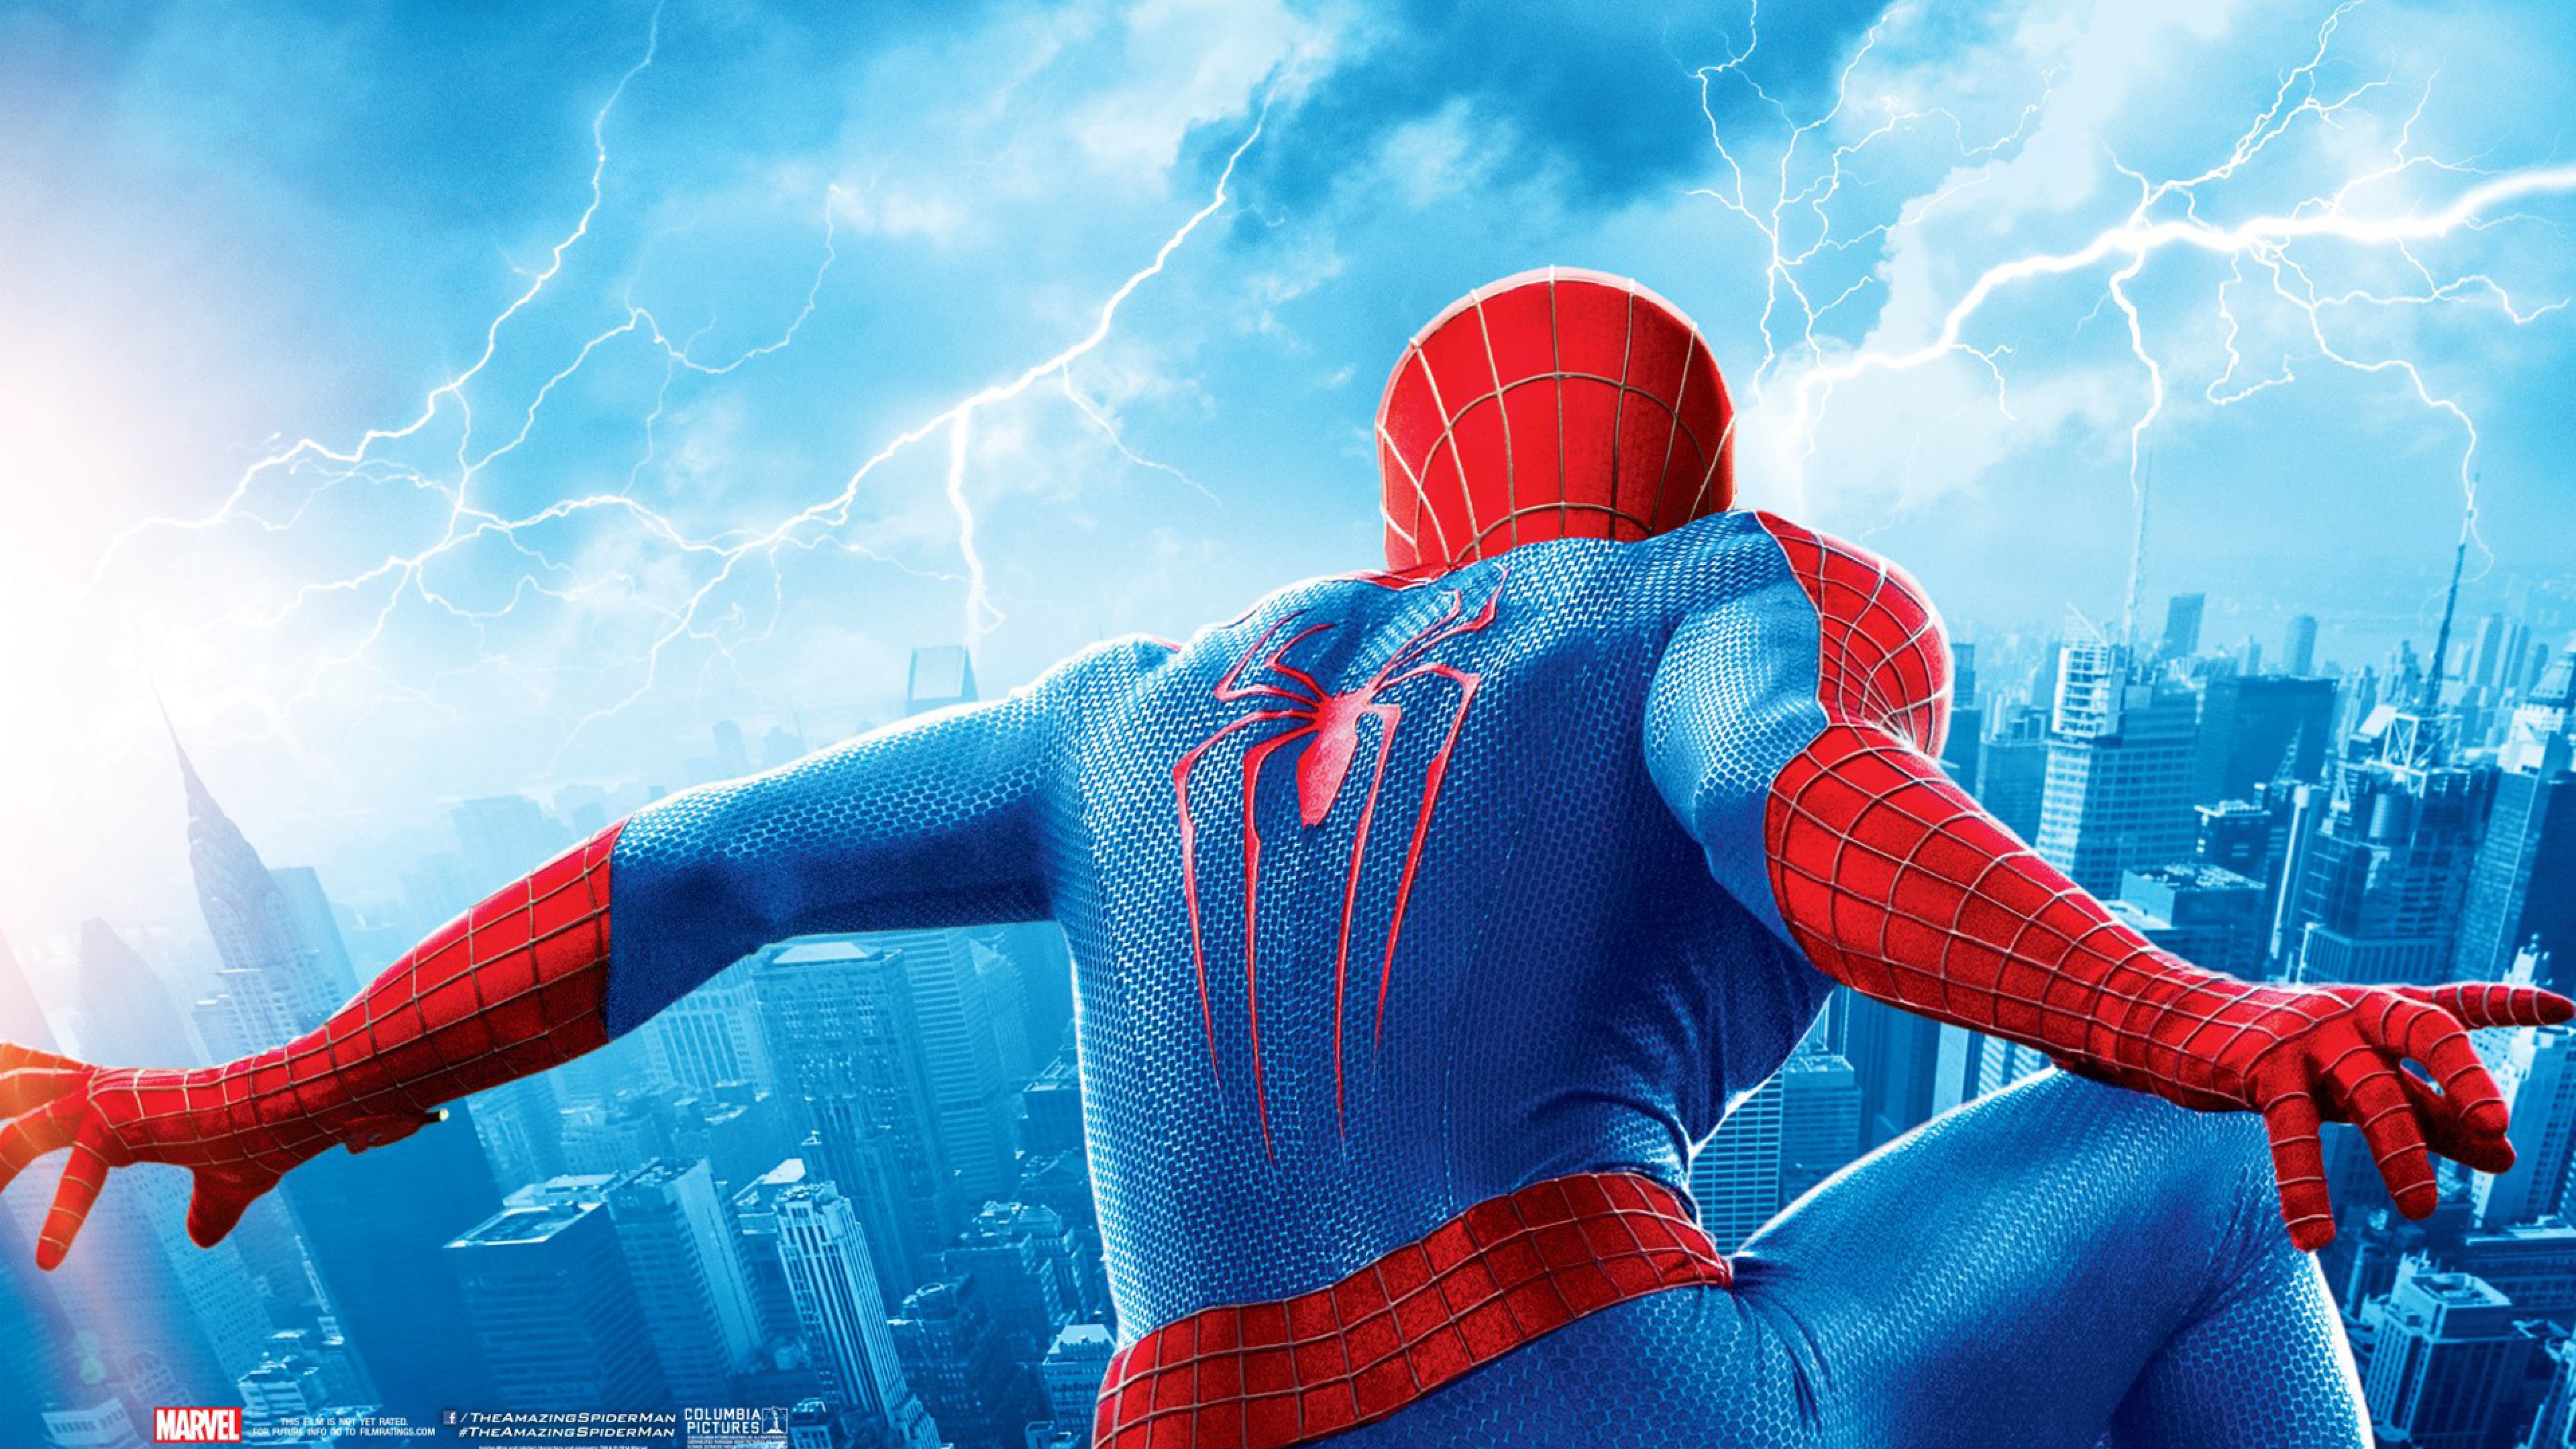 Download Wallpaper 3840x2160 The amazing spider man 2, Andrew ...